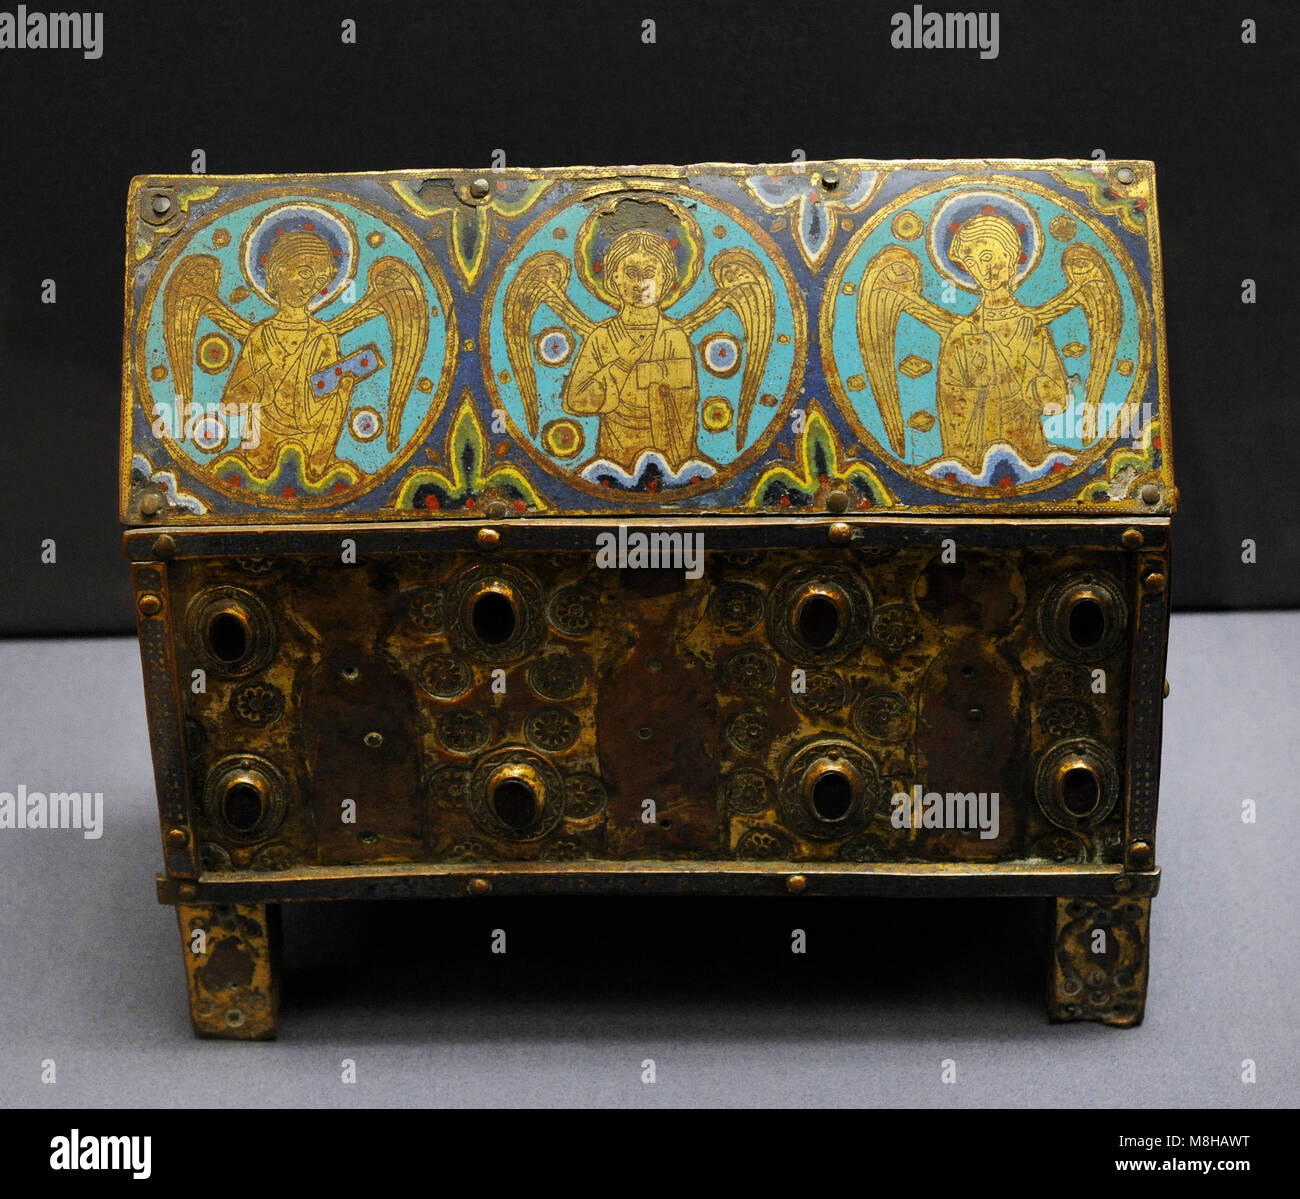 Small chasse with angels in medallions. Limoges, c. 1200-1210. Copper with enamel on oak. Museum Schnütgen. Cologne, Germany. Stock Photo